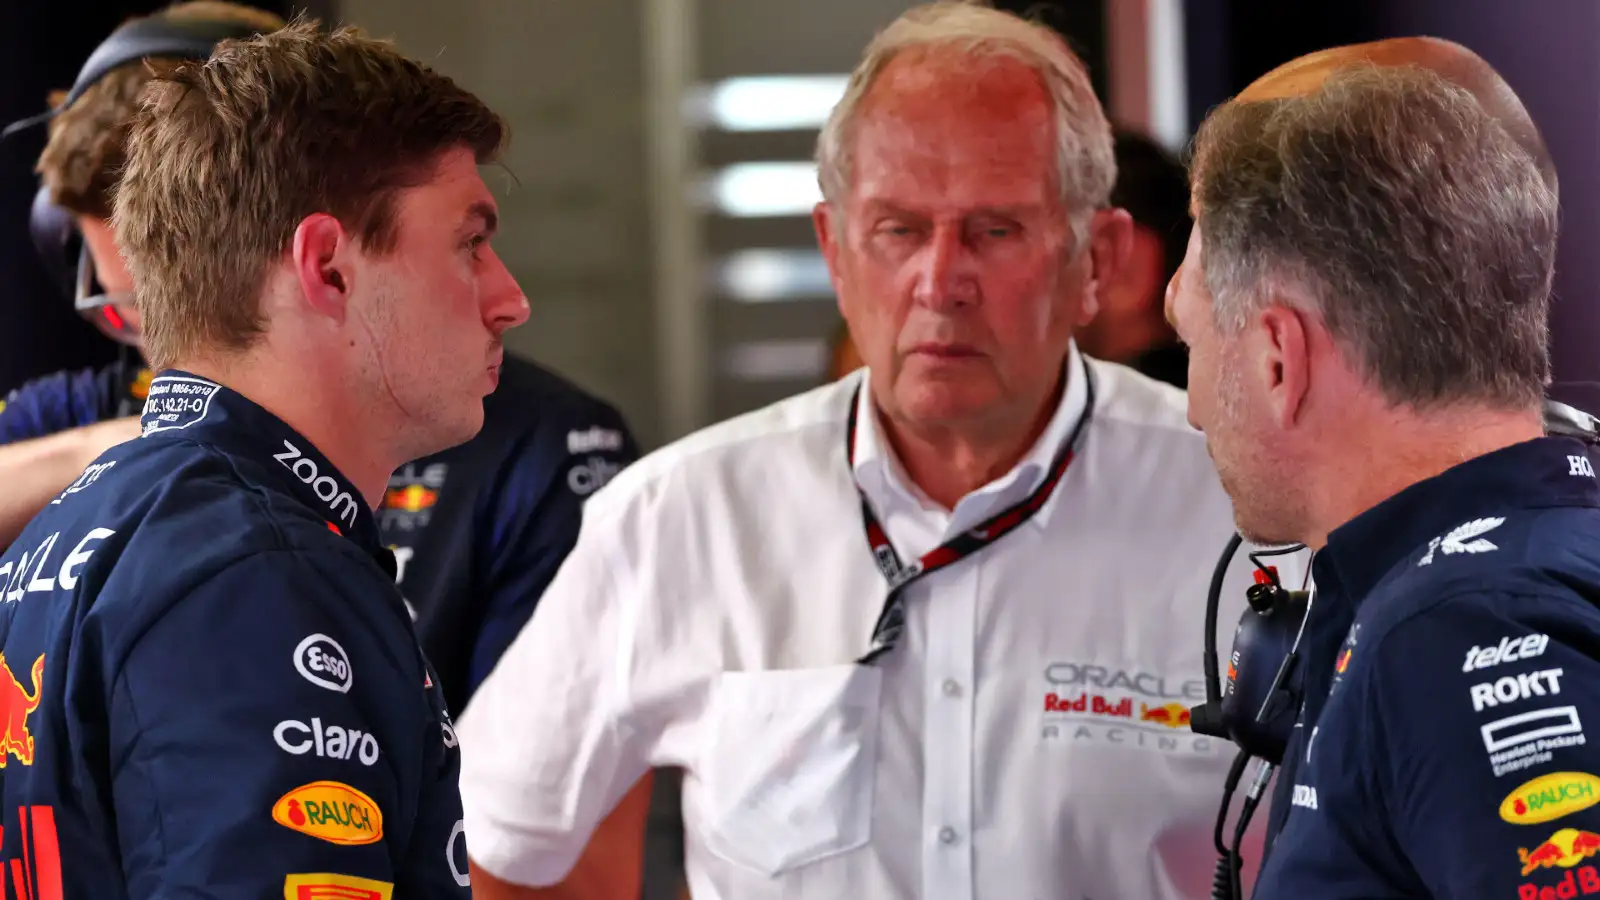 Red Bull driver Max Verstappen in conversation with Christian Horner and Helmut Marko at the Austrian Grand Prix.